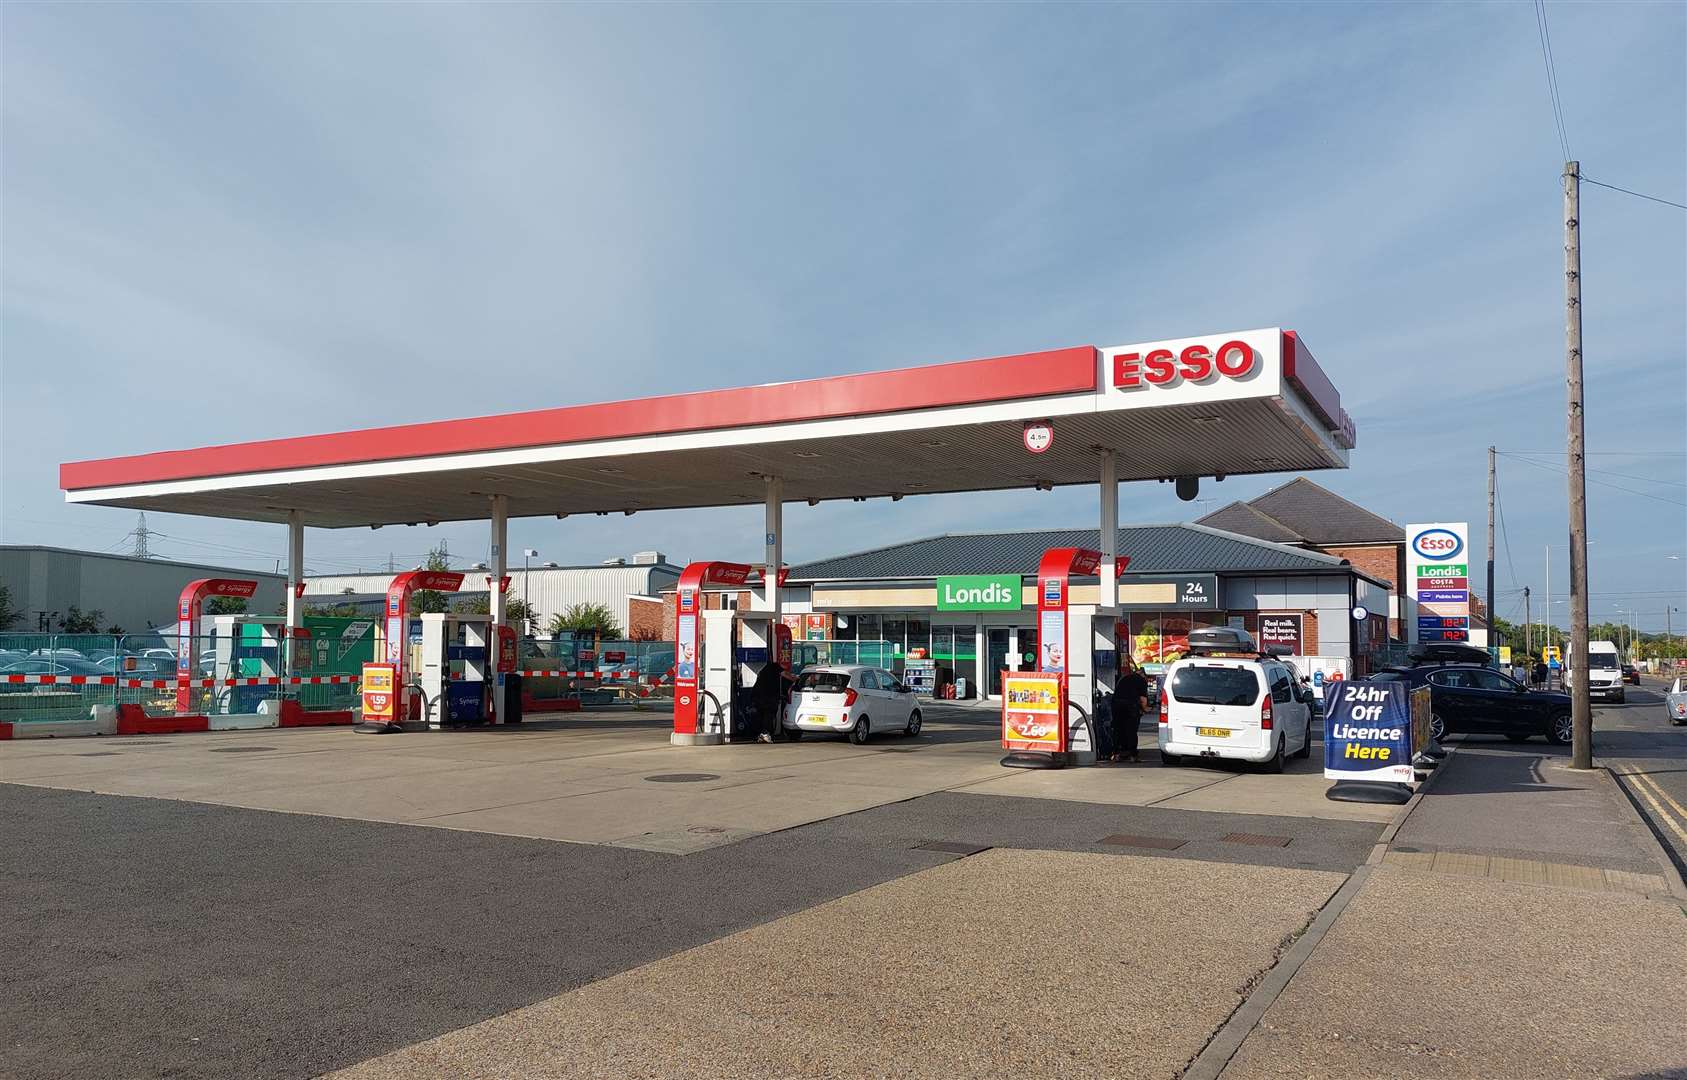 The Esso garage in Sturry Road, Canterbury